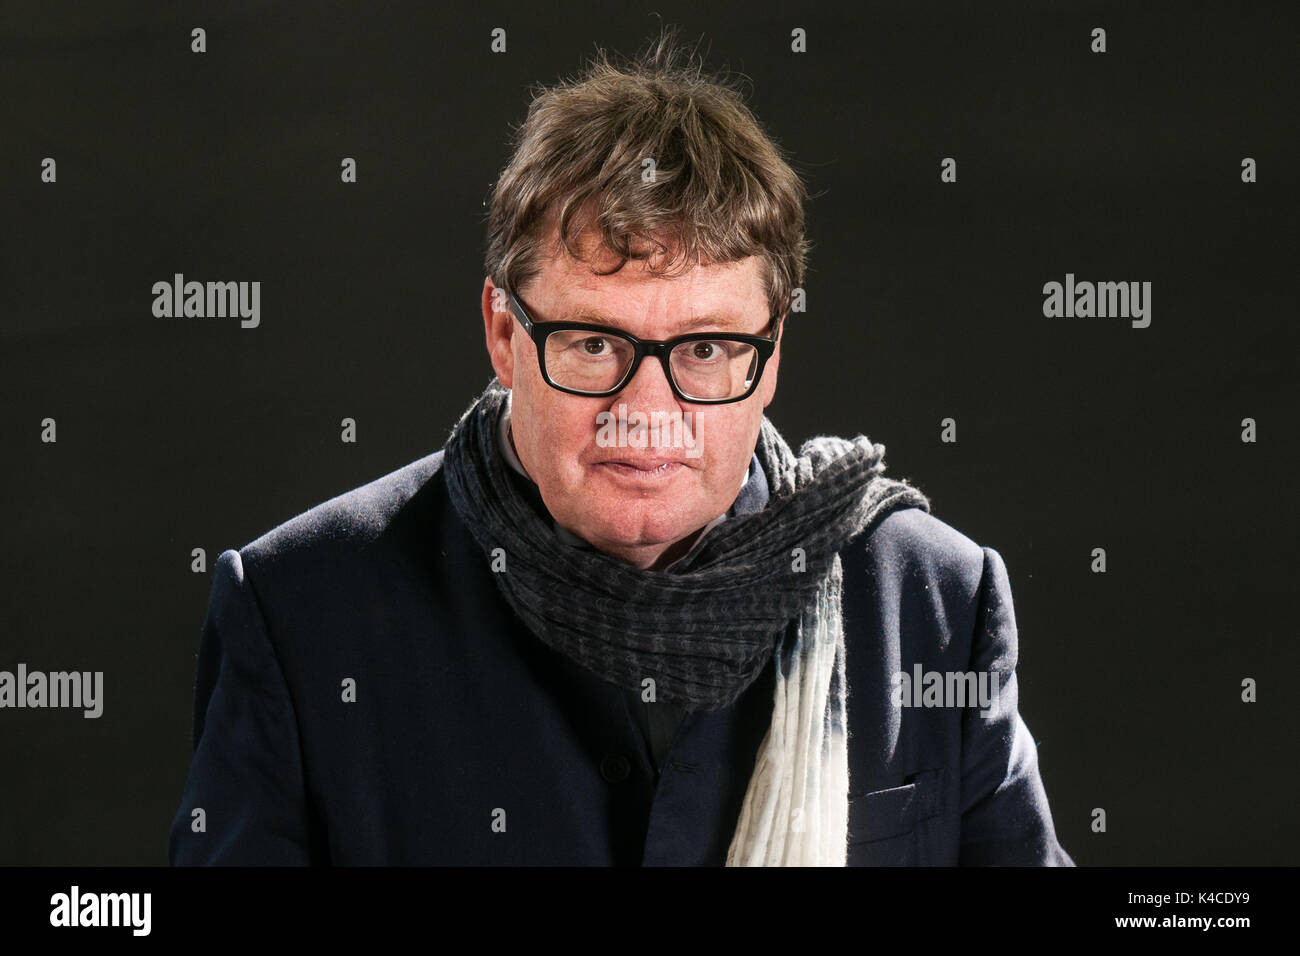 British novelist, documentary film-maker, television producer and playwright James Runcie attends a photocall during the Edinburgh International Book  Stock Photo